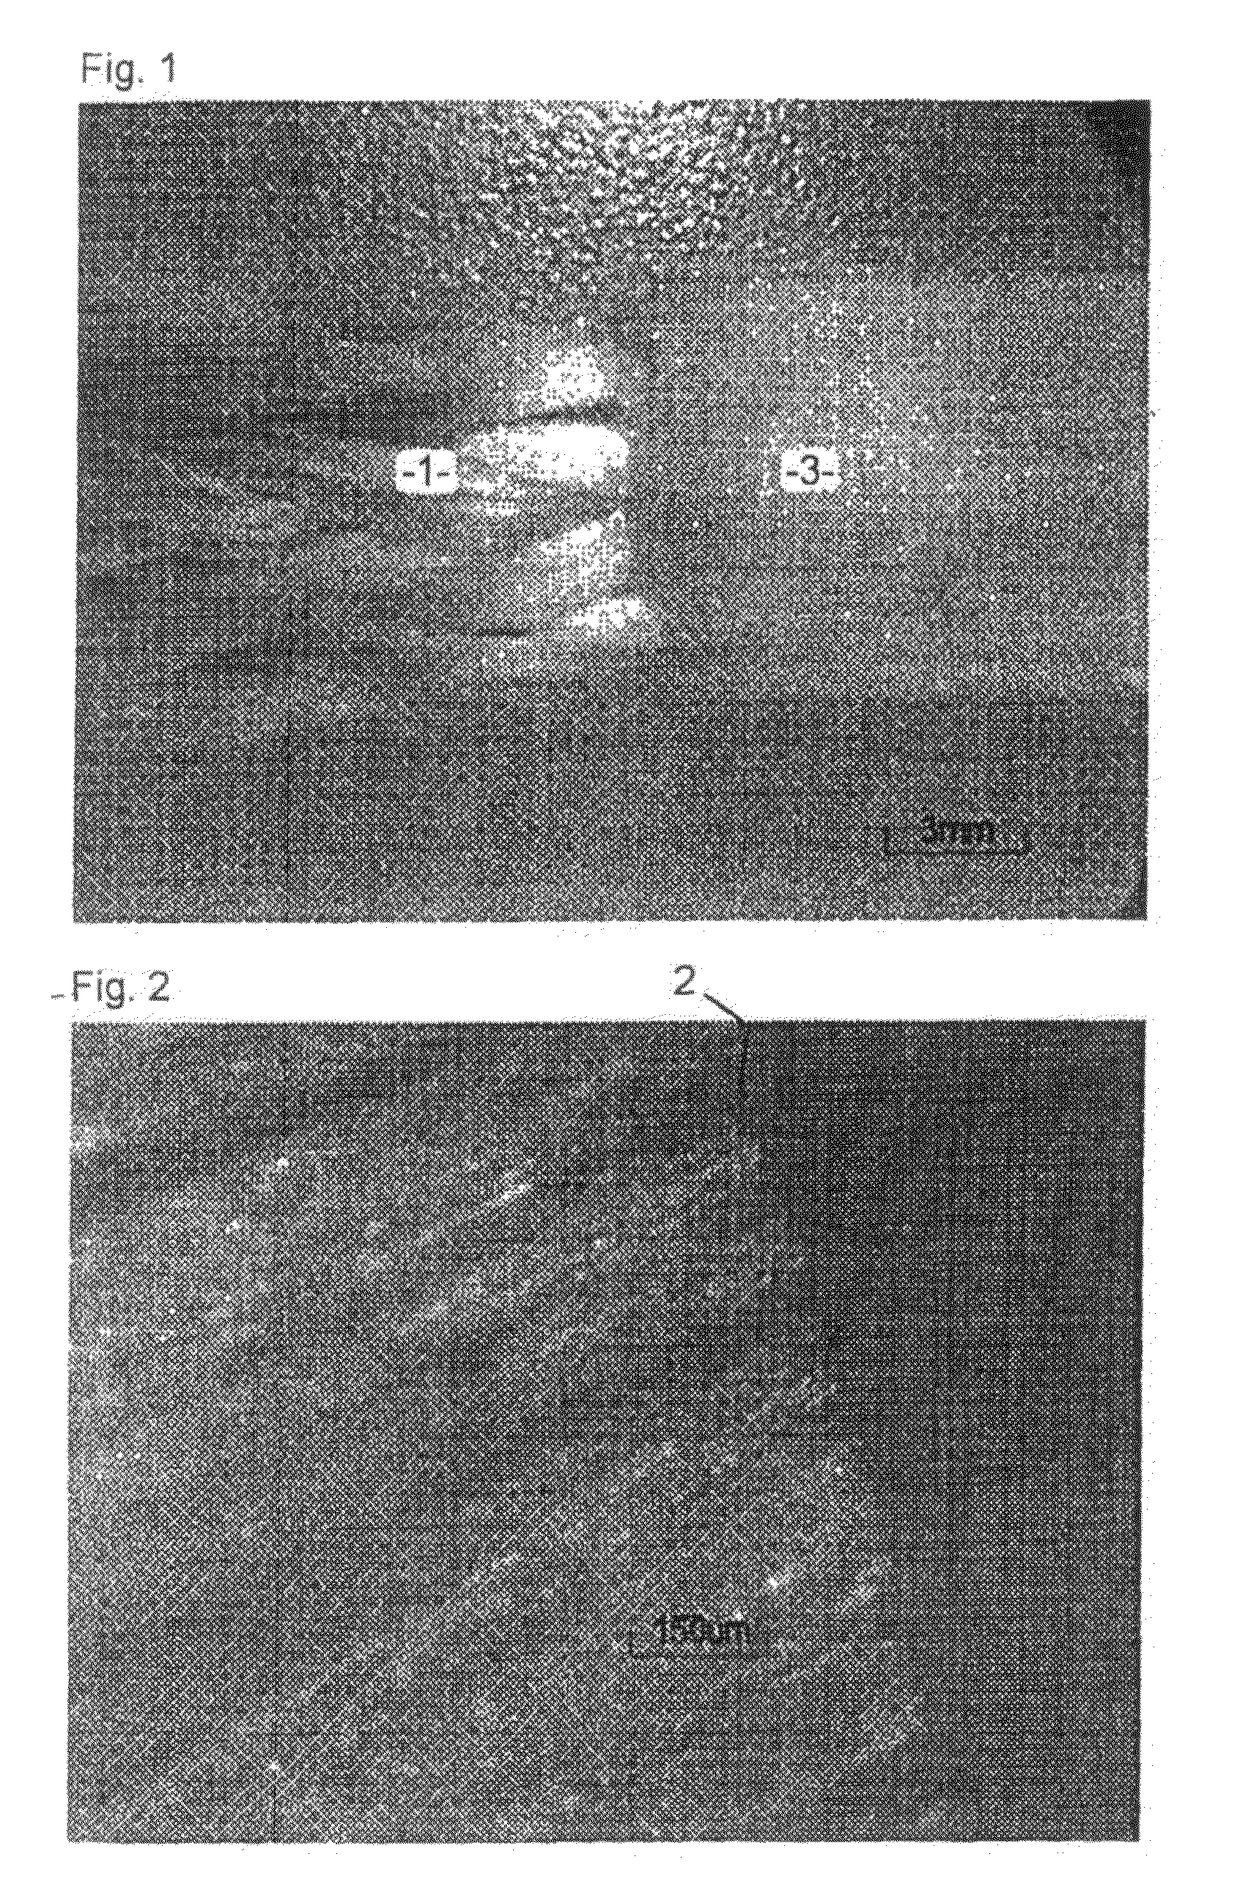 Process of manufacturing fiber reinforced composite via selective infusion of resin and resin blocking substance